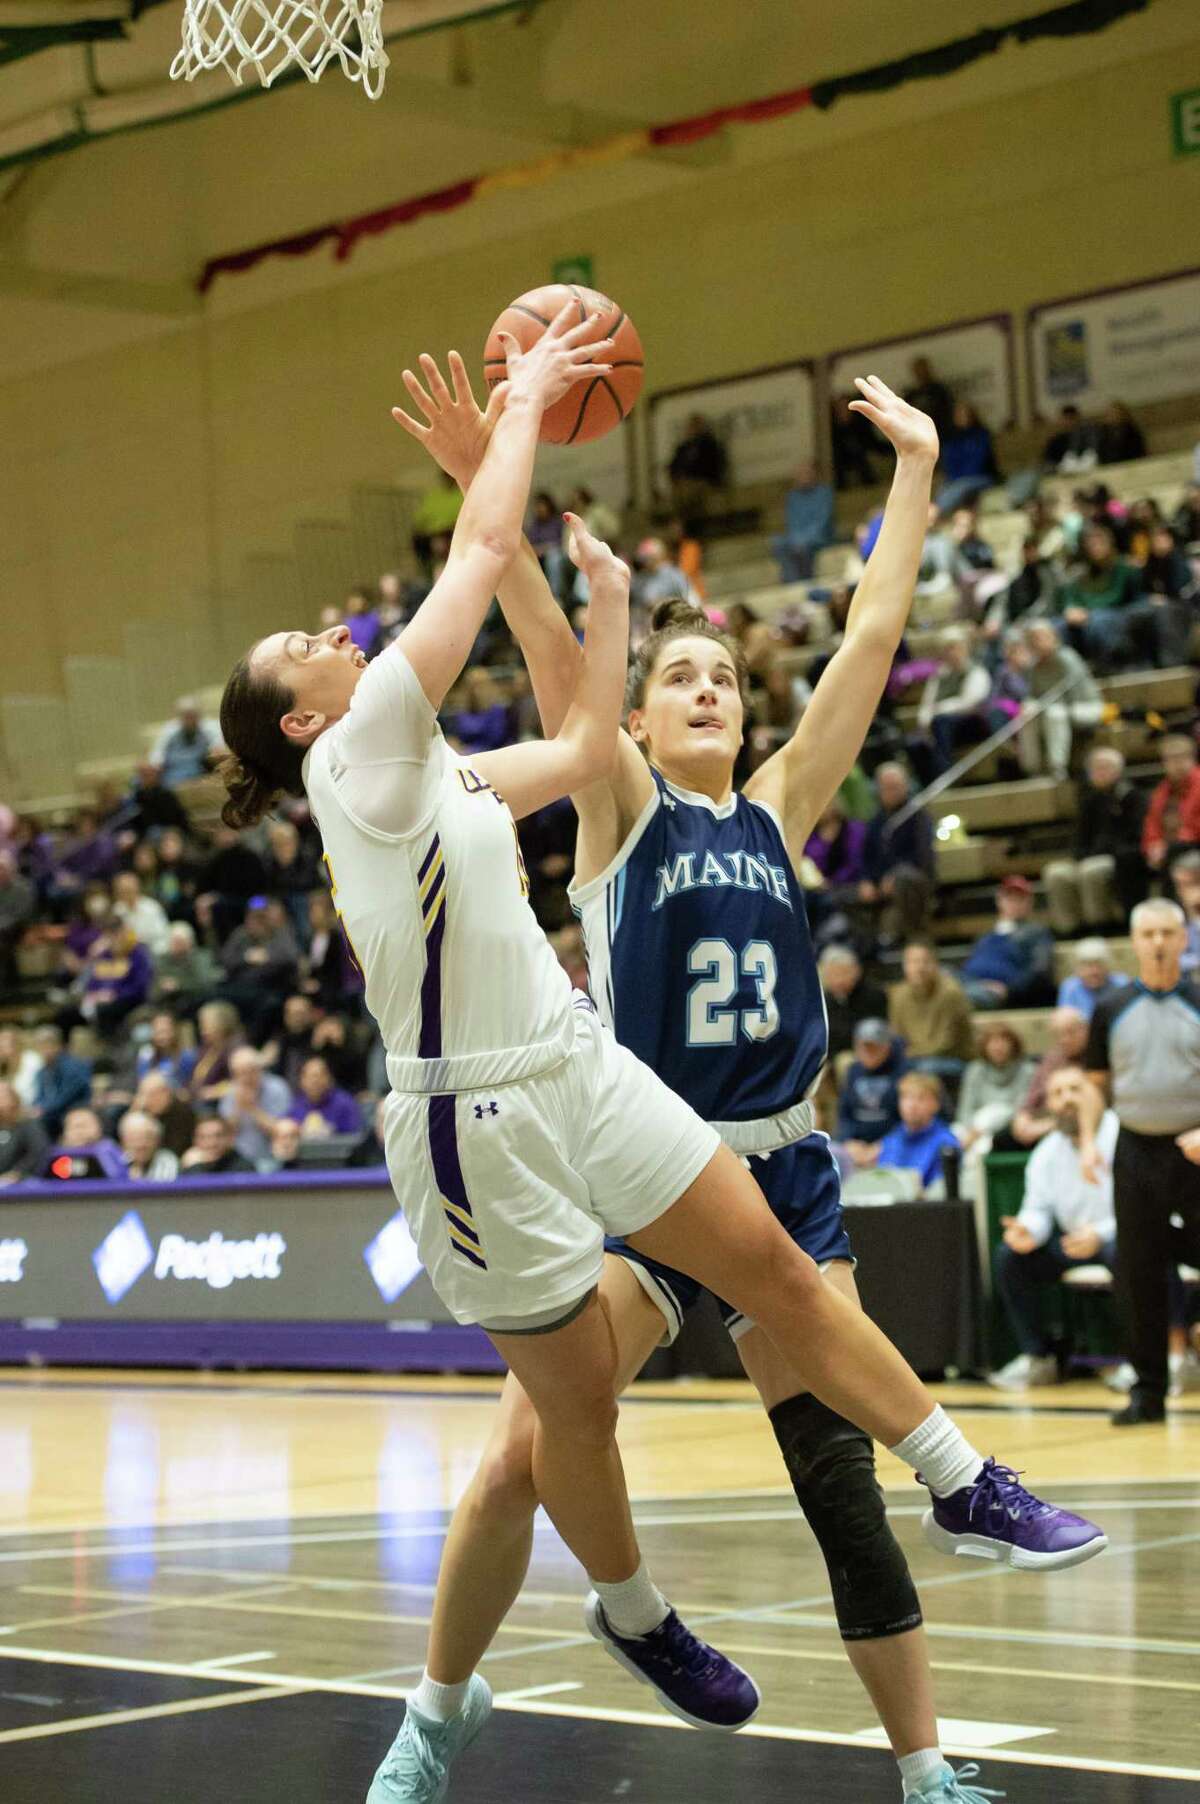 UAlbany’s Morgan Haney attempts a shot as Maine’s Abbe Lawrence pressures during a game at McDonough Sports Complex in Troy, N.Y. on Sunday, Feb. 15, 2023.